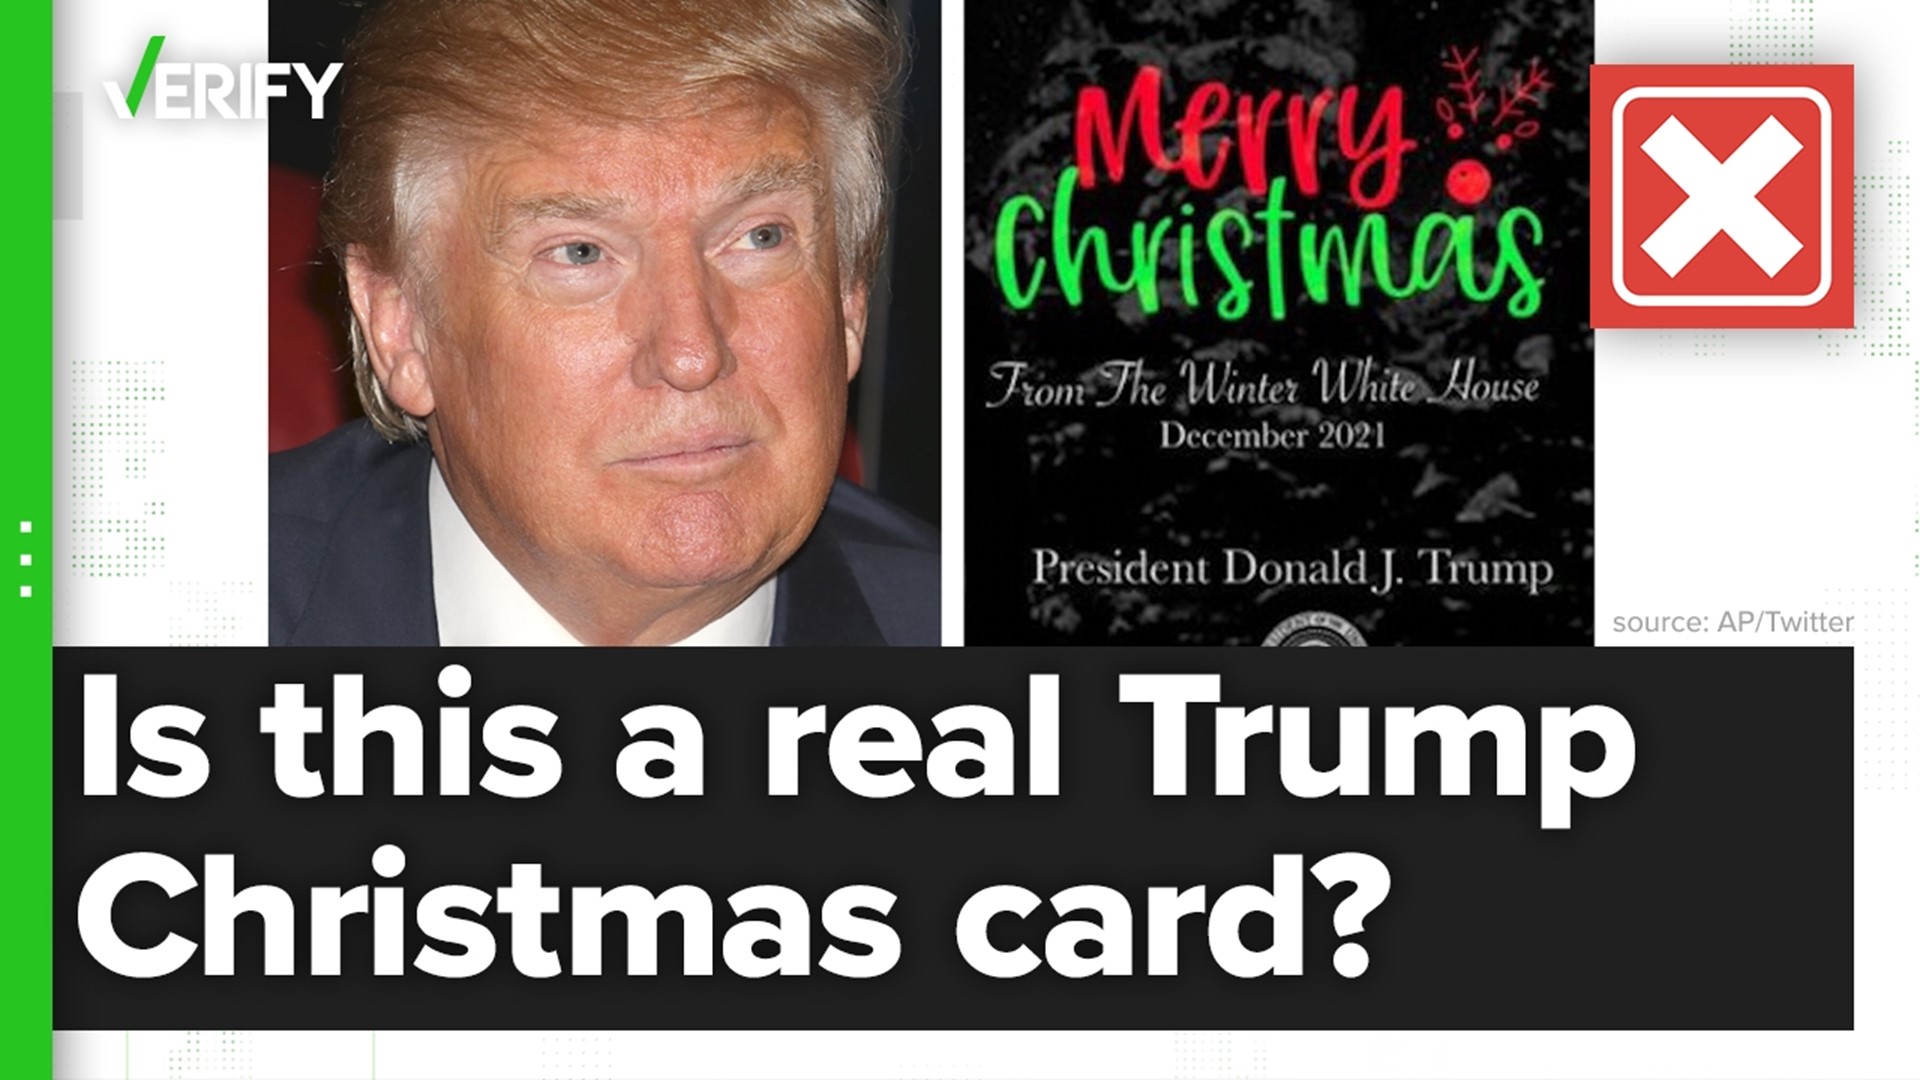 A parody Christmas card made to look like it came from former President Donald Trump was manipulated. It was created using a Getty Images photo of Trump from 2019.